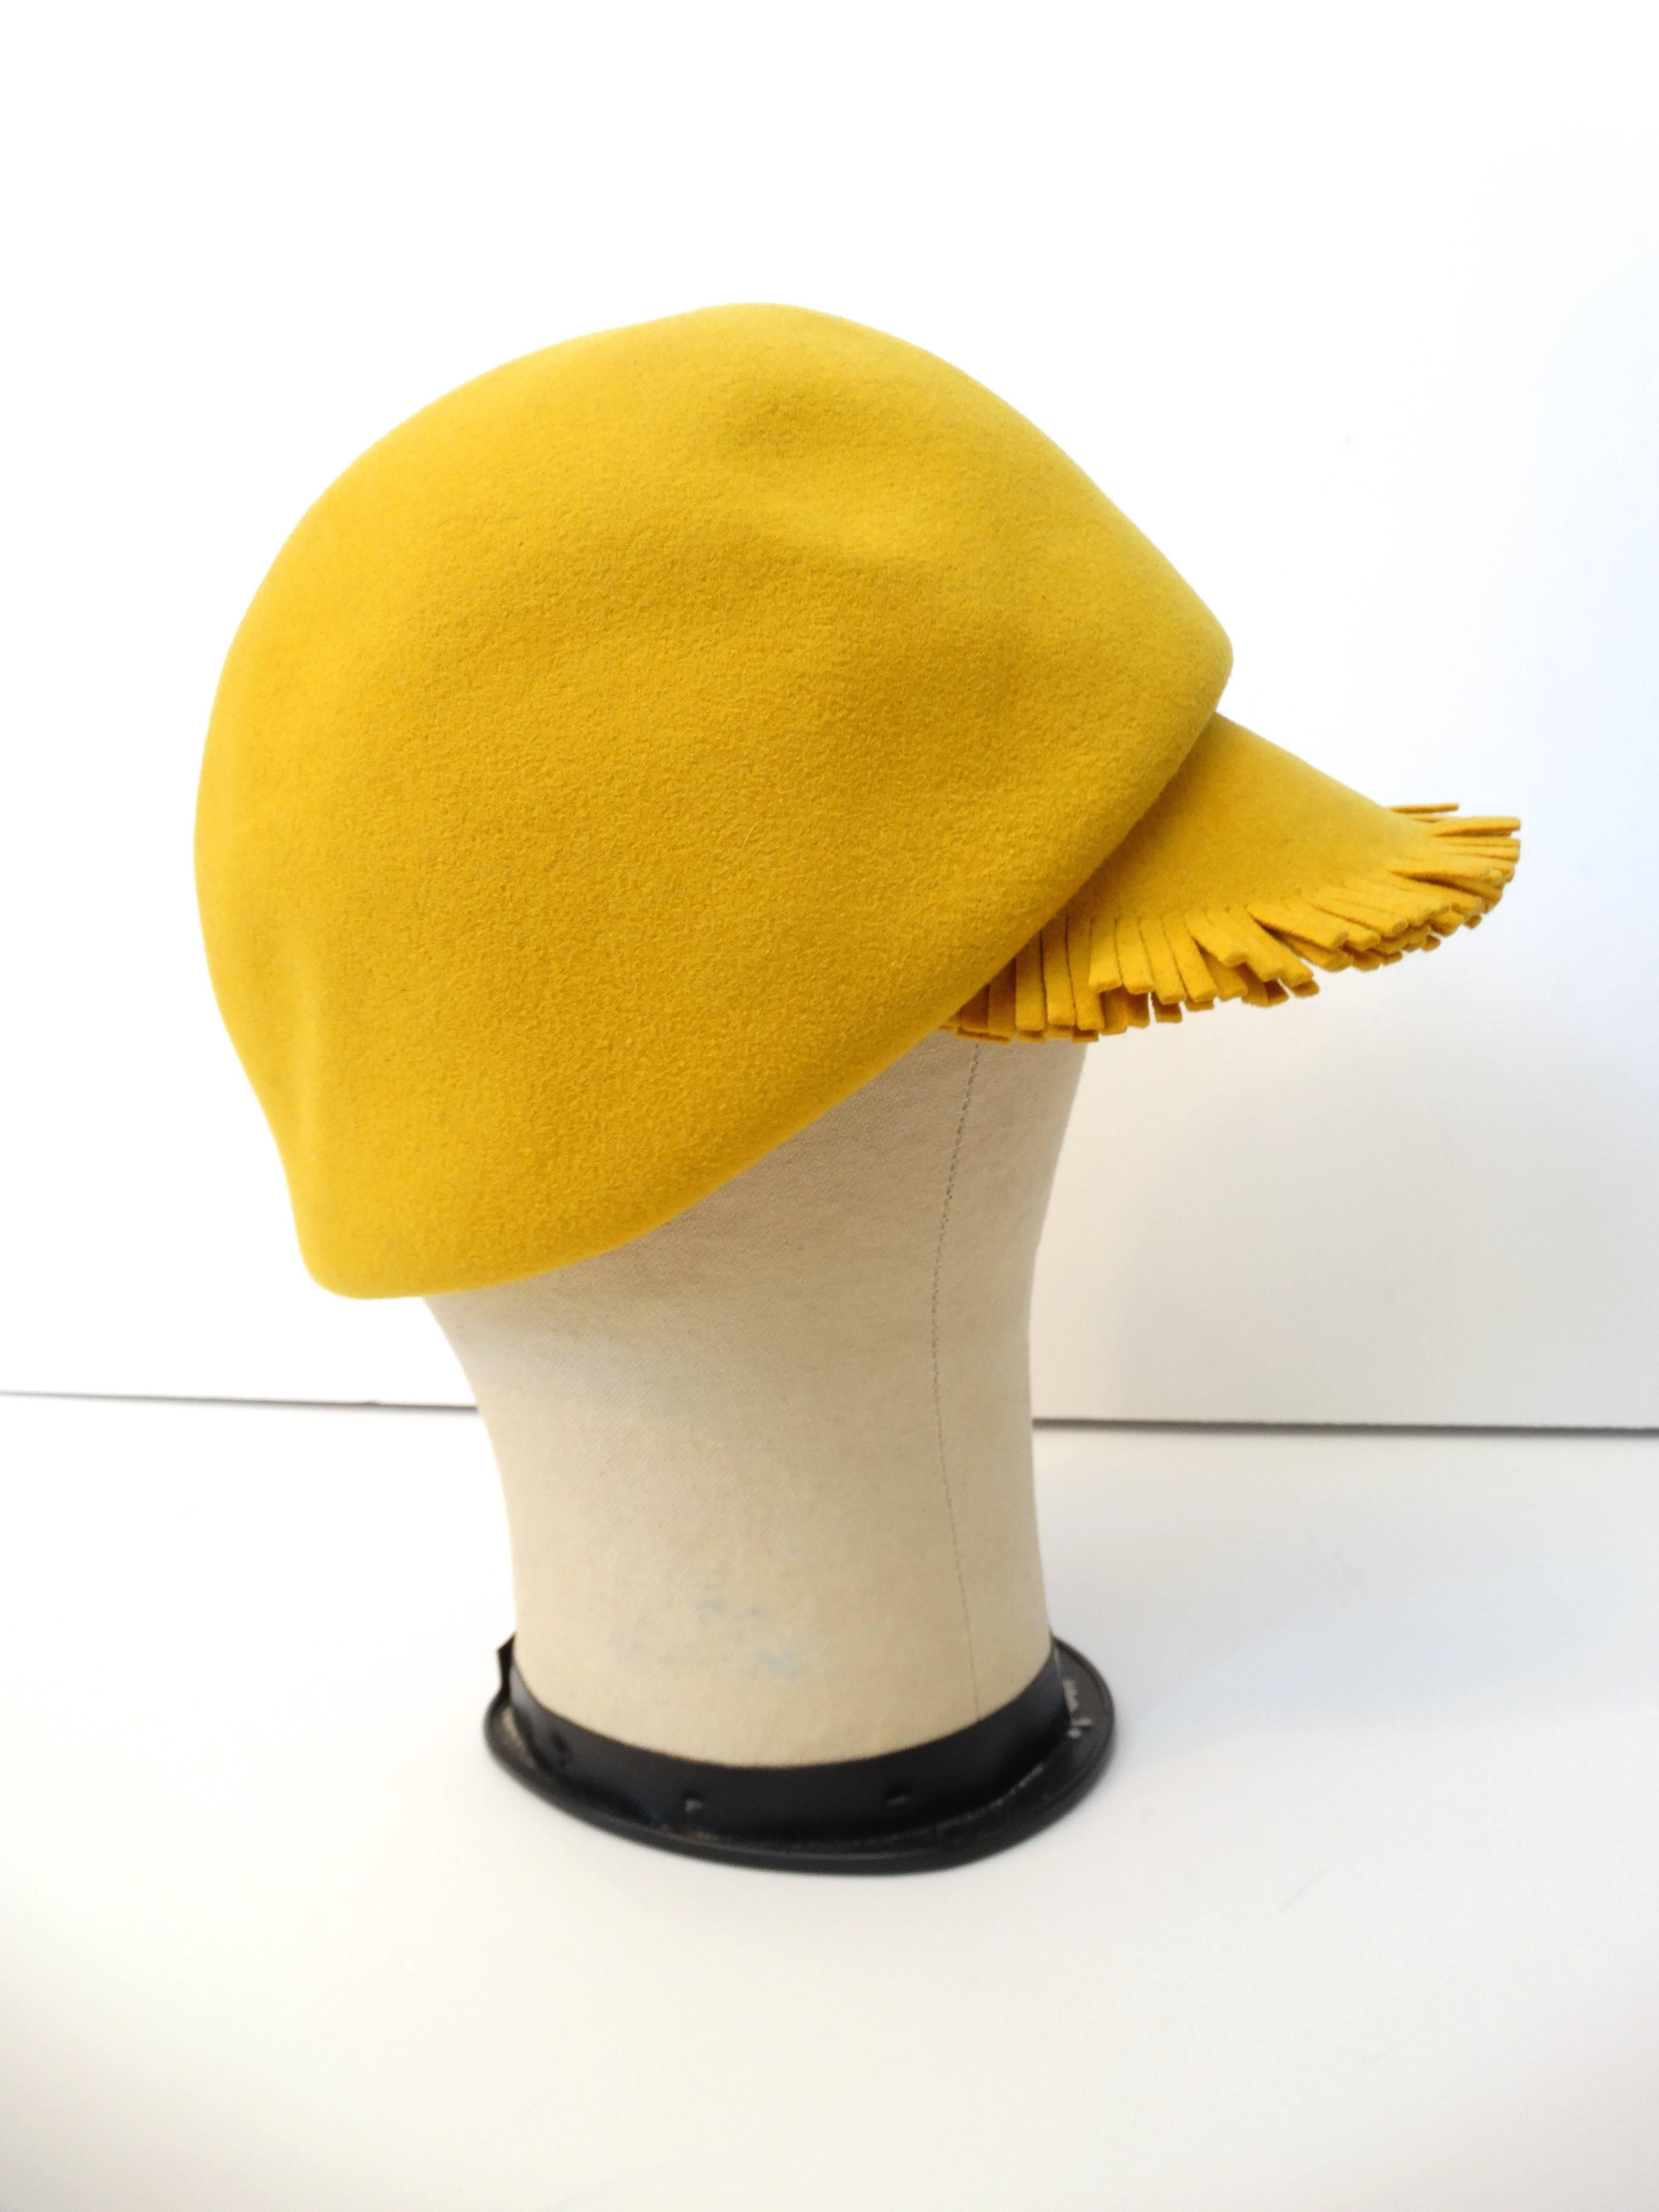 1960's melange blend felt bonnet cap by Henry Pollak for Mr. John Classic, in the perfect pantone prime rose yellow. Fringe trim cap with tonal wool ties. Ribbed interior lining. Size small , crown diameter 7